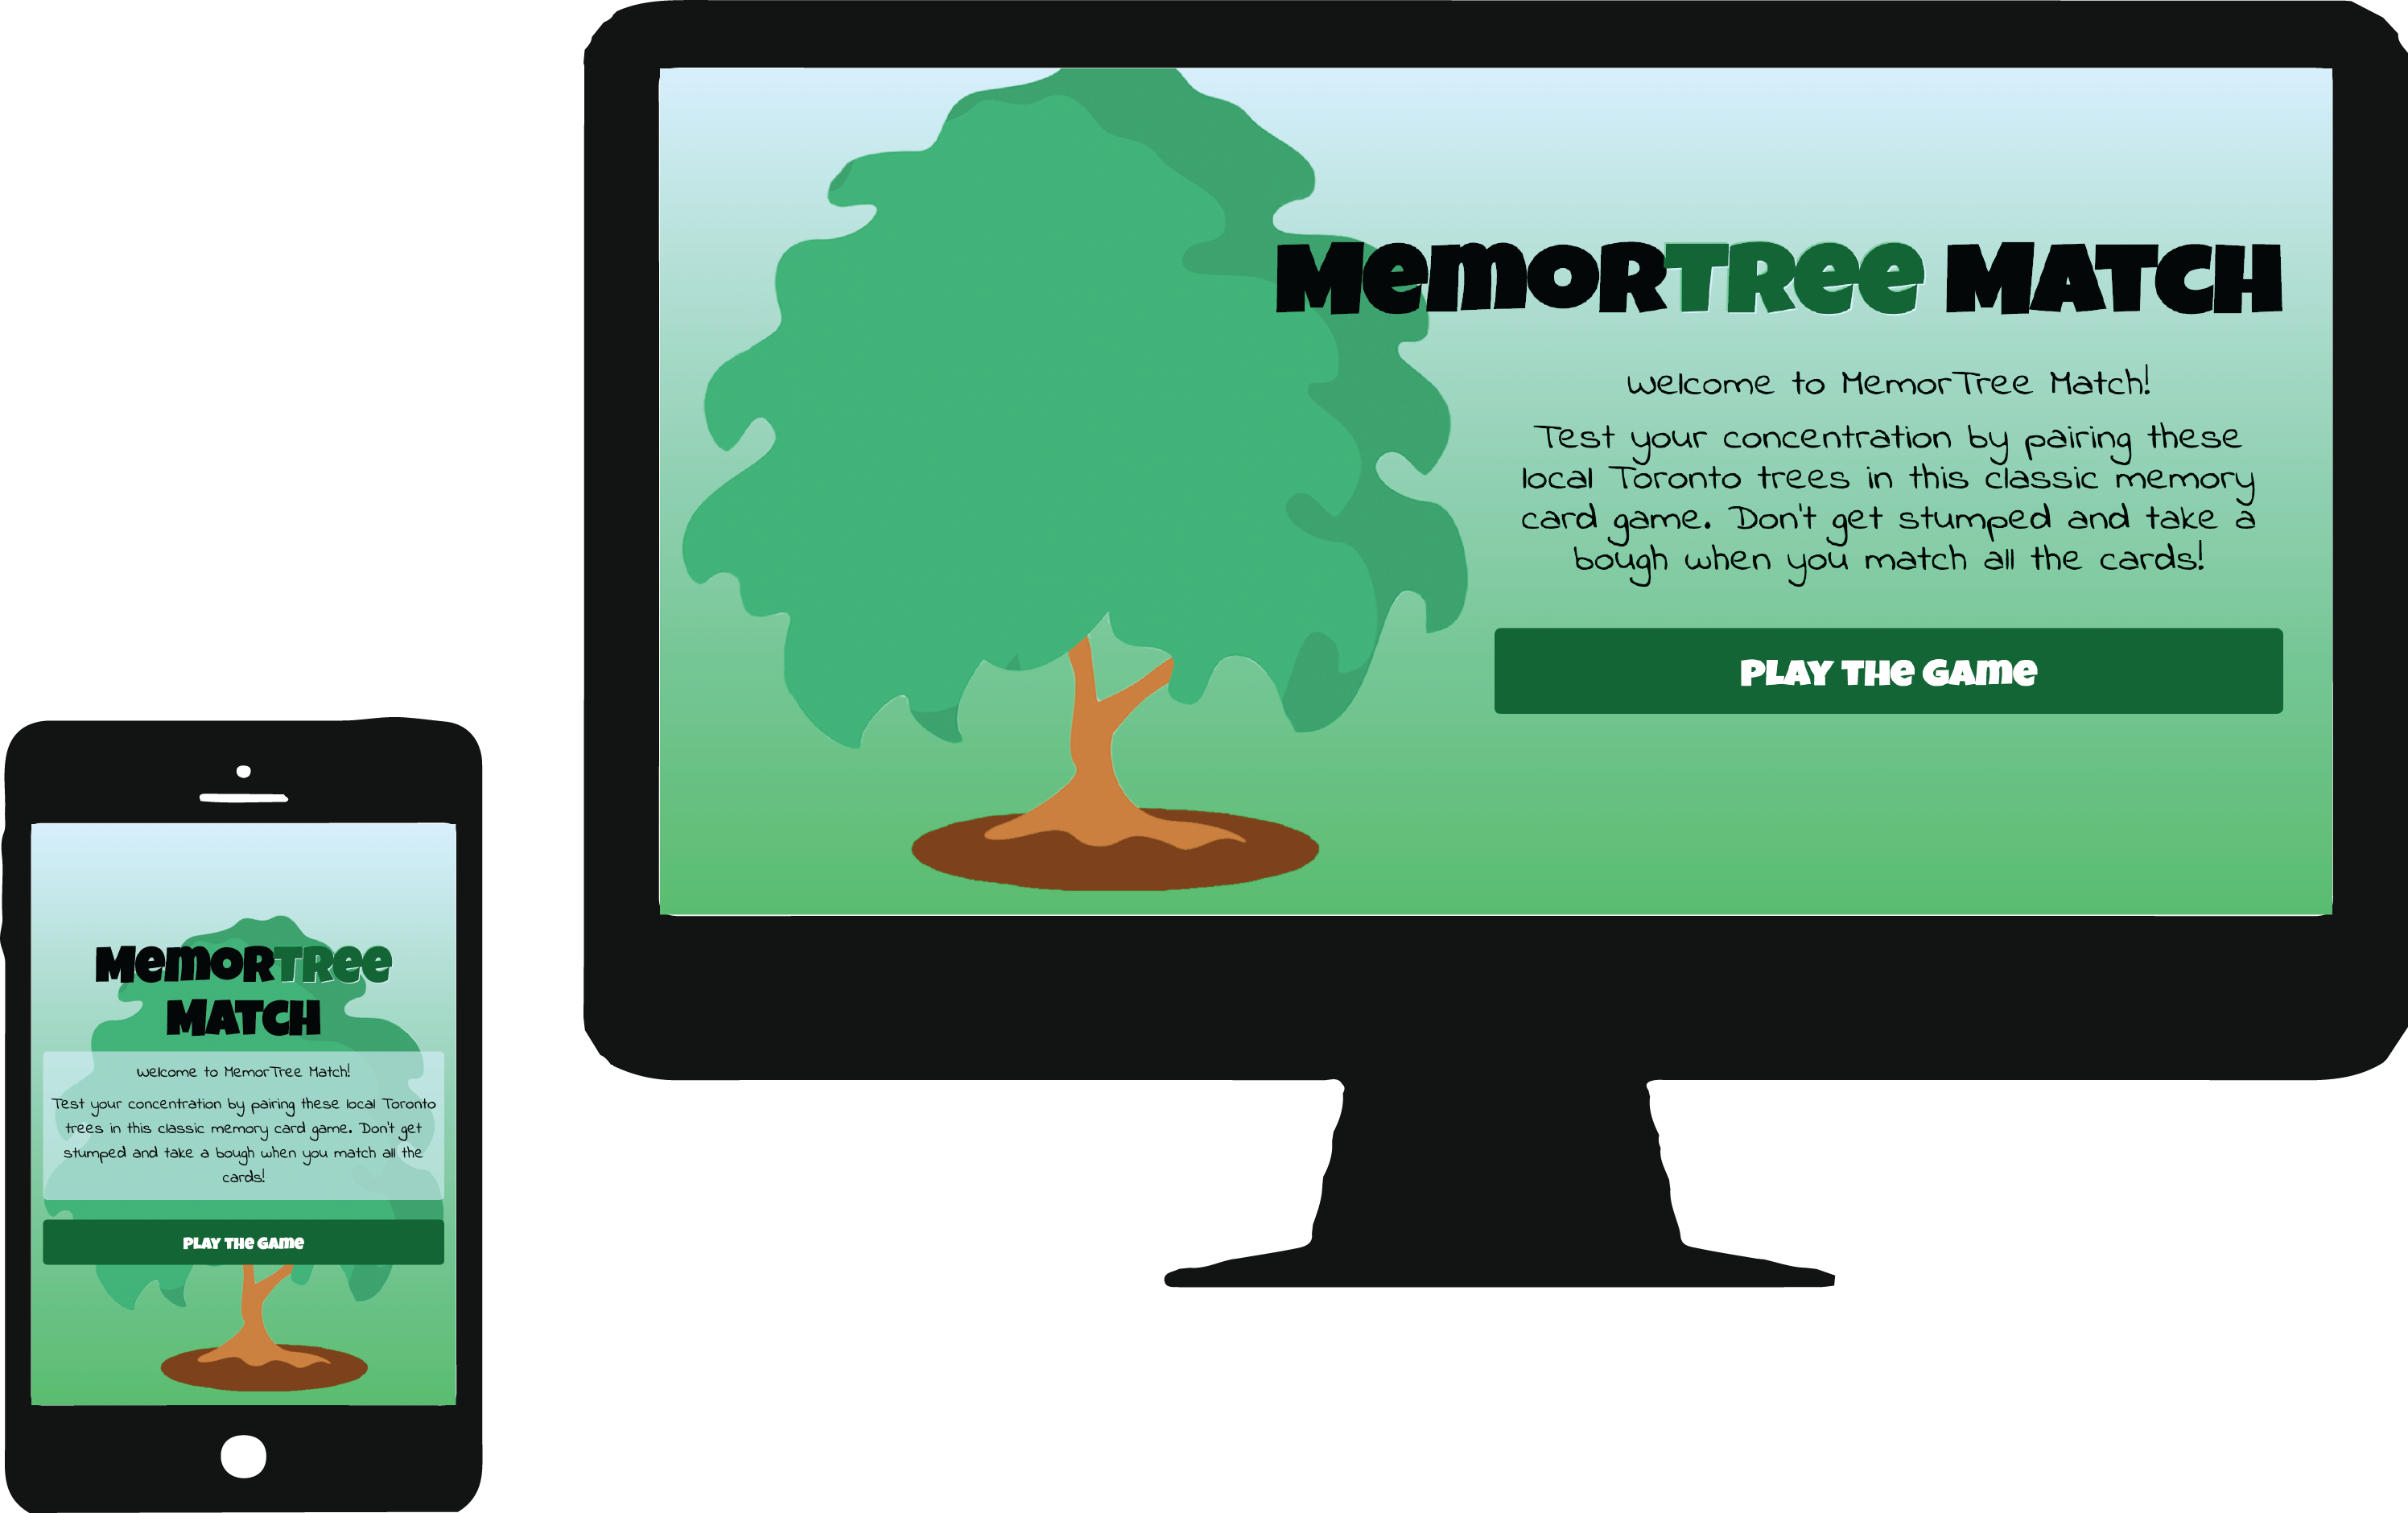 The MemorTree Match website displayed on desktop and mobile screens.